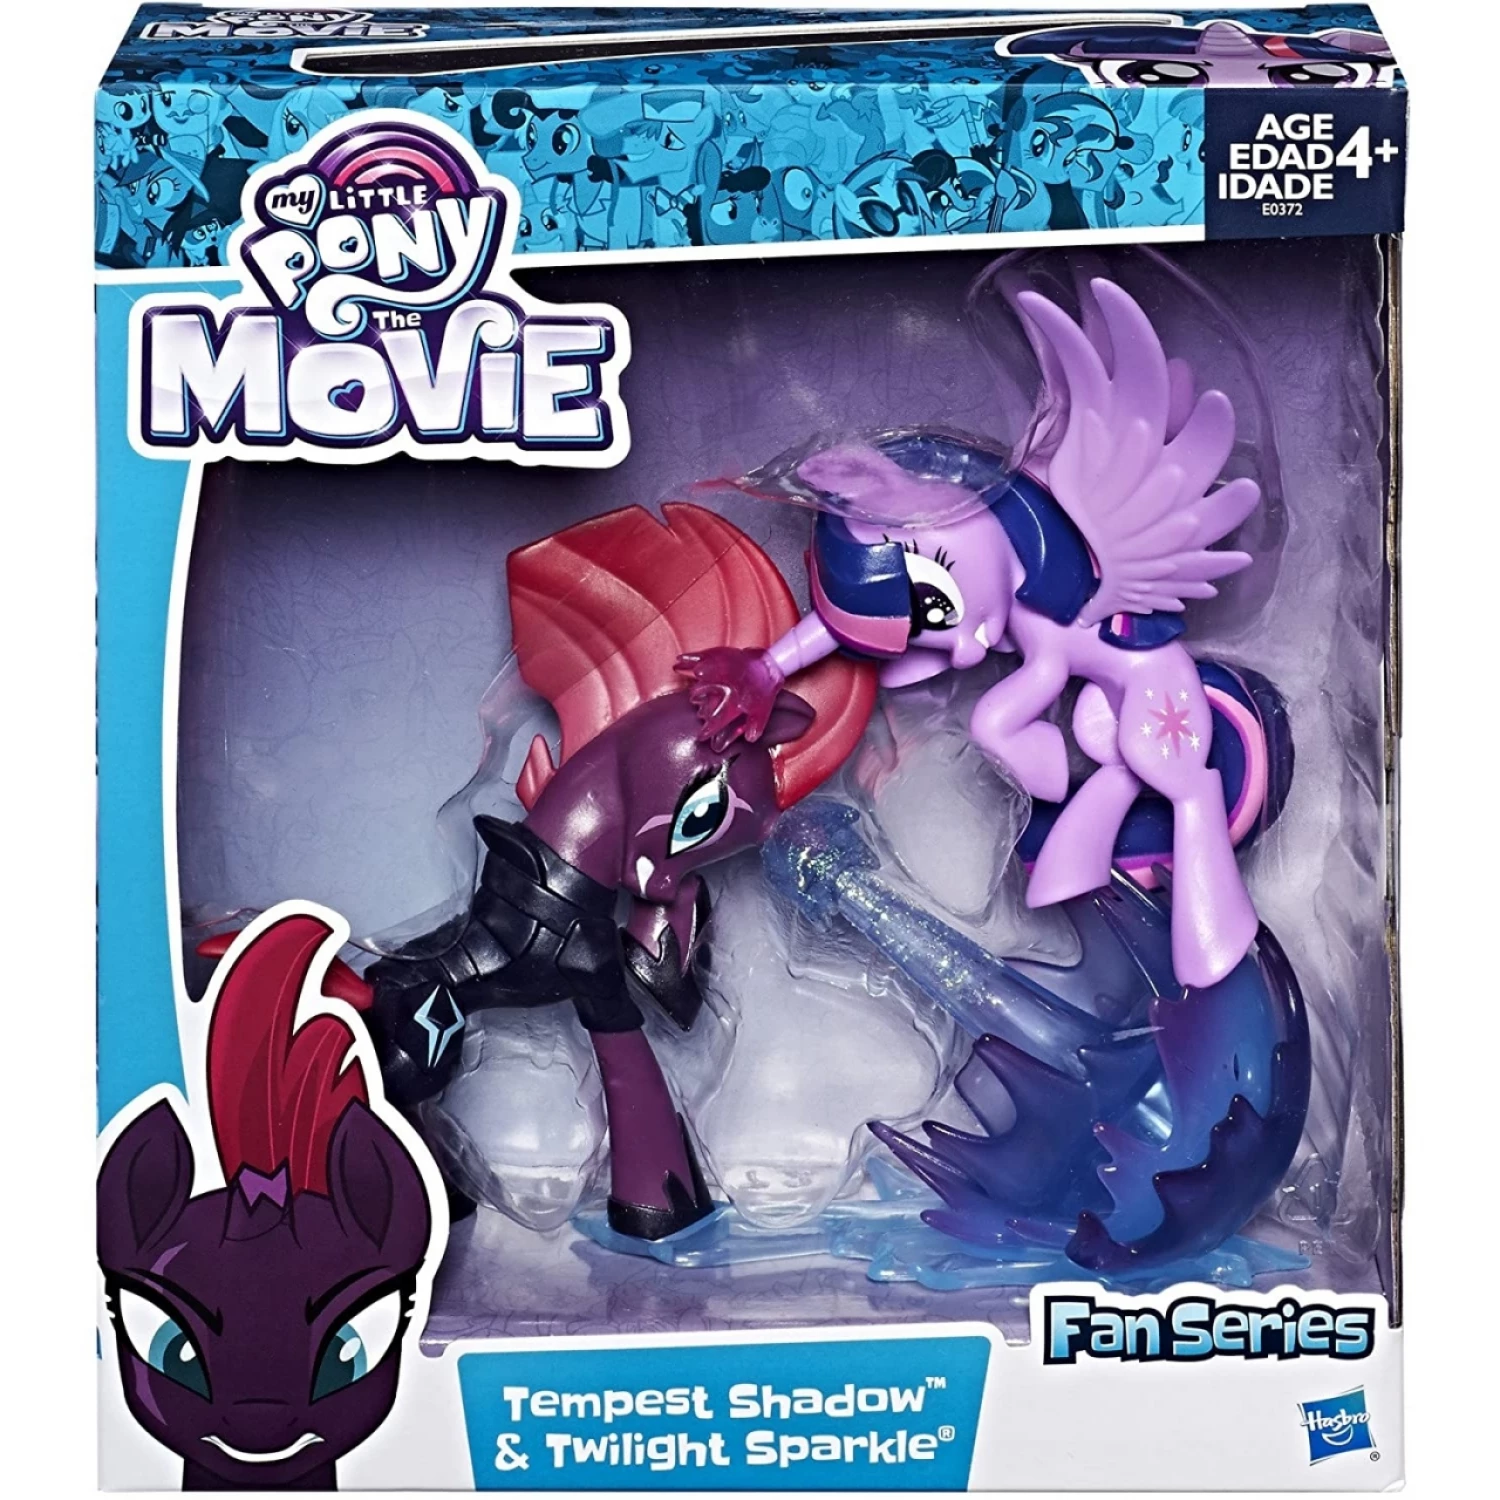 MY LITTLE PONY THE MOVIE FAN SERIES TEMPEST SHADOW & TWILIGHT SPARKLE